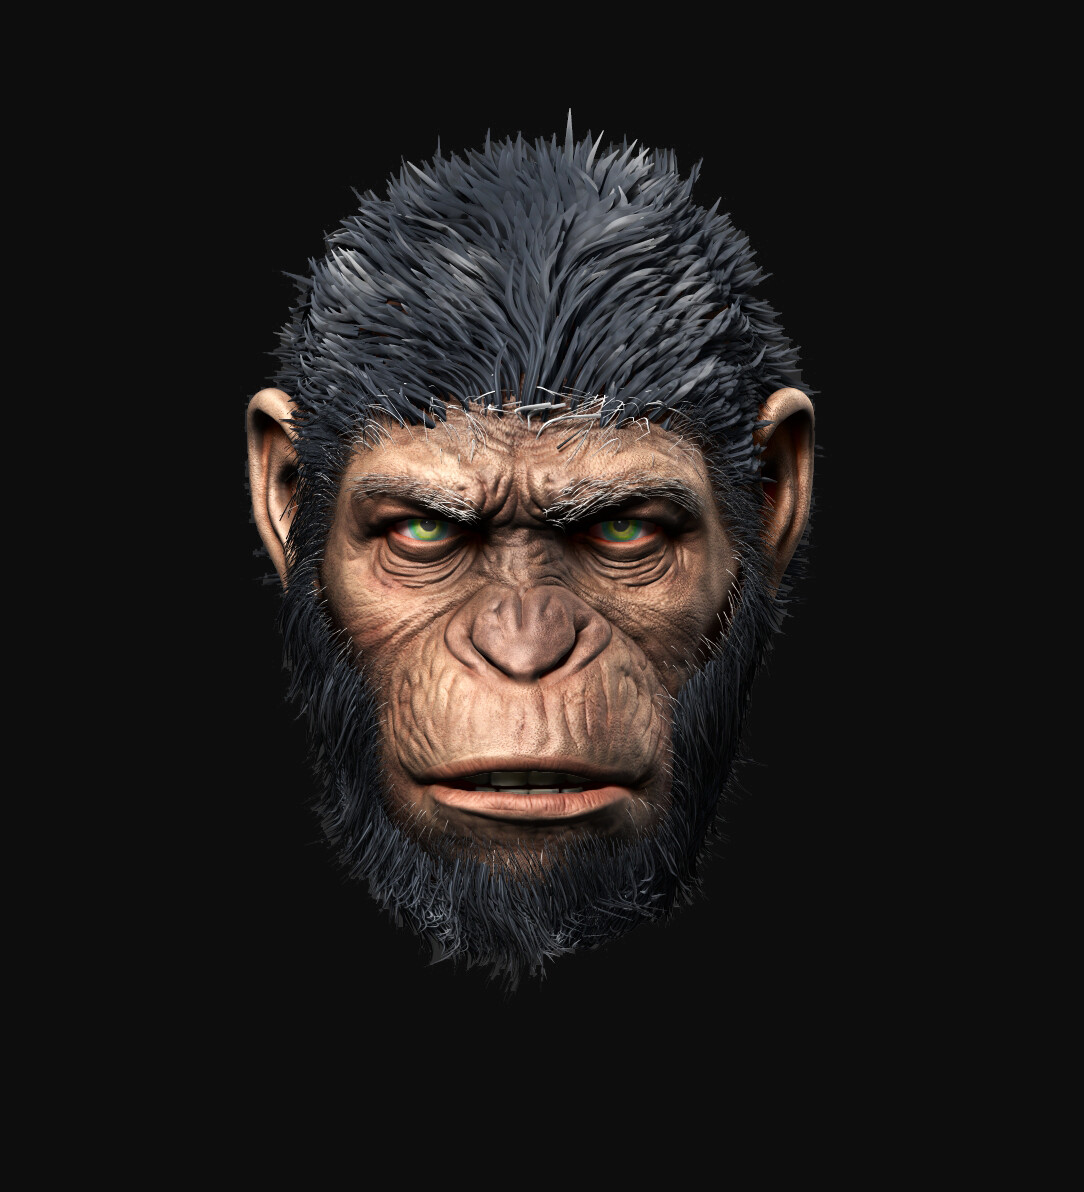 Caesar - Planet of the apes